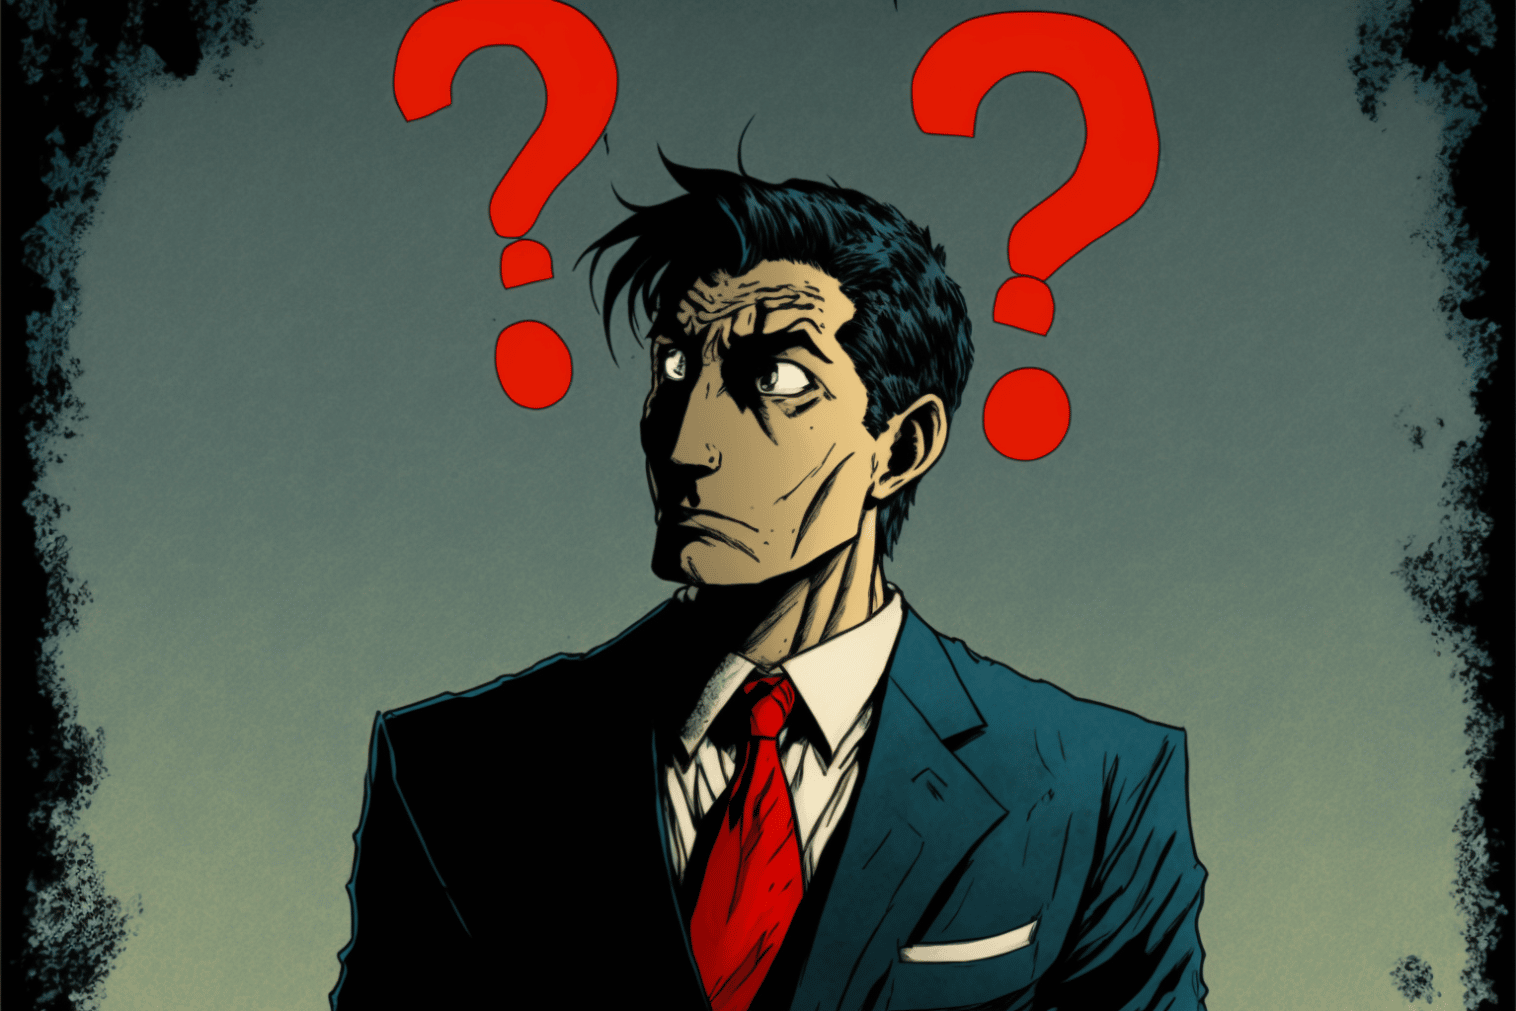 a-person-in-a-suit-thinking-with-red-question-marks-above-their-head